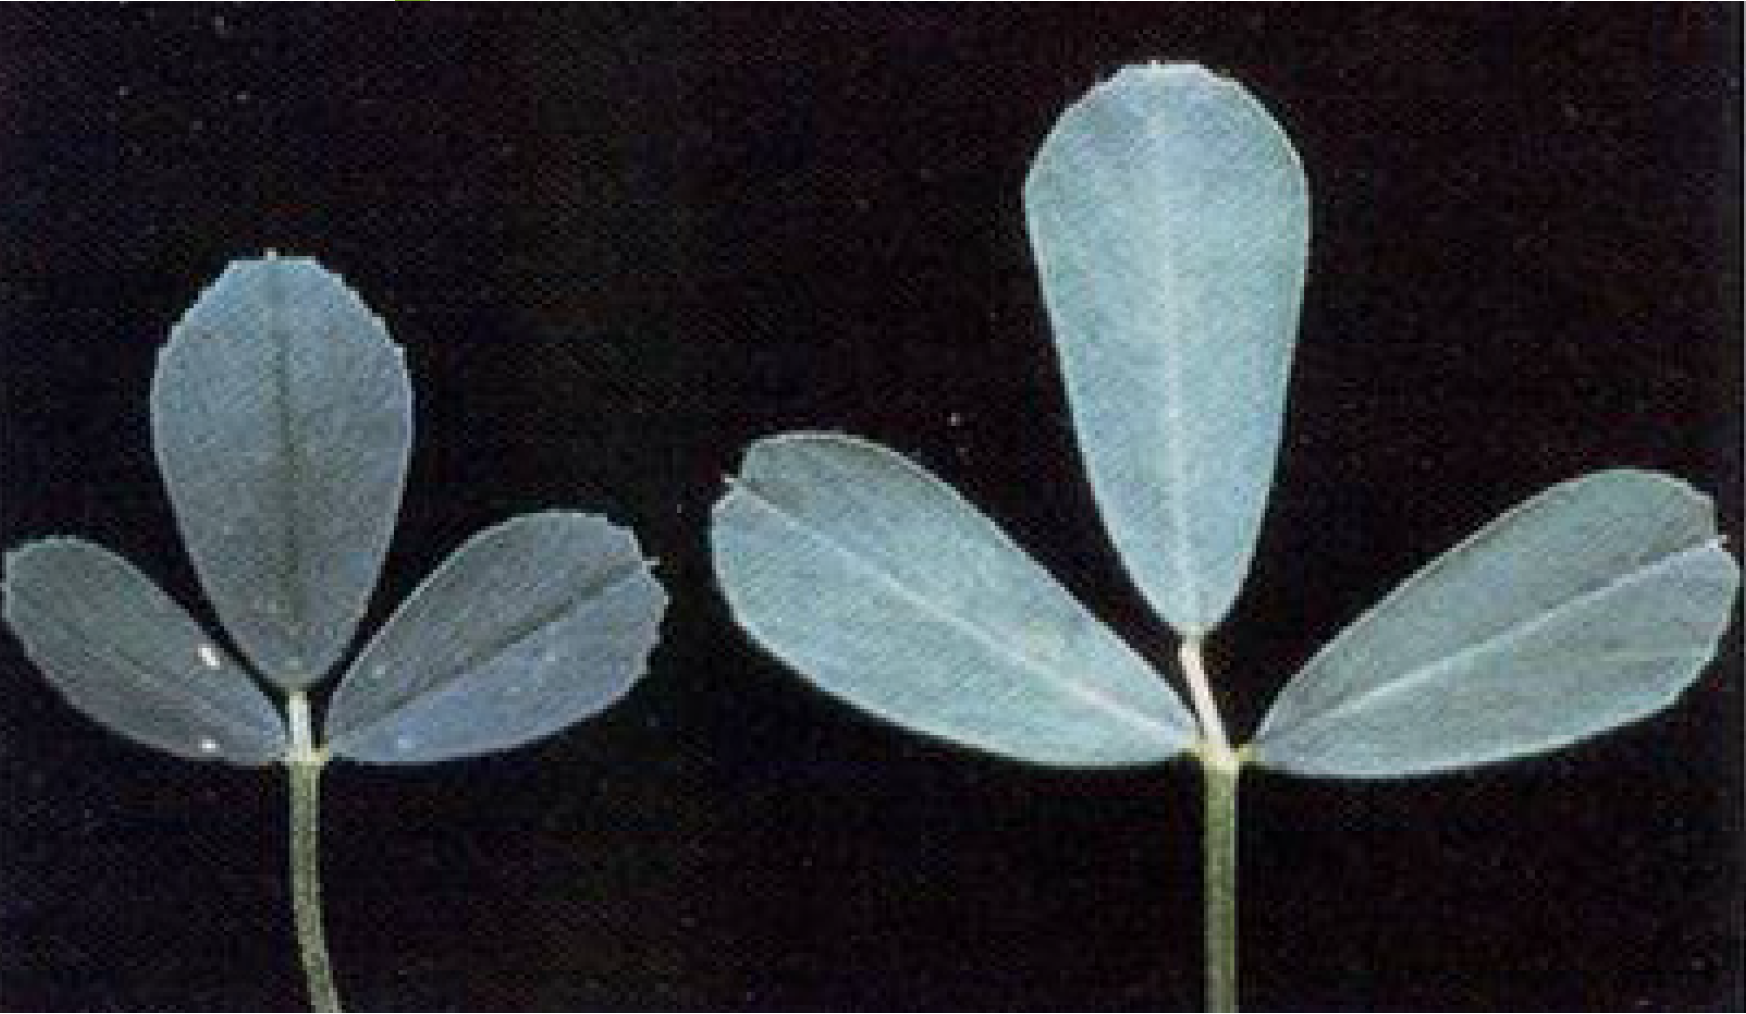 Two alfalfa leaves are shown. The leaf on the left is smaller and oddly colored due to a phosphorous deficiency, while the leaf on the right is normal and appears bigger and healthier